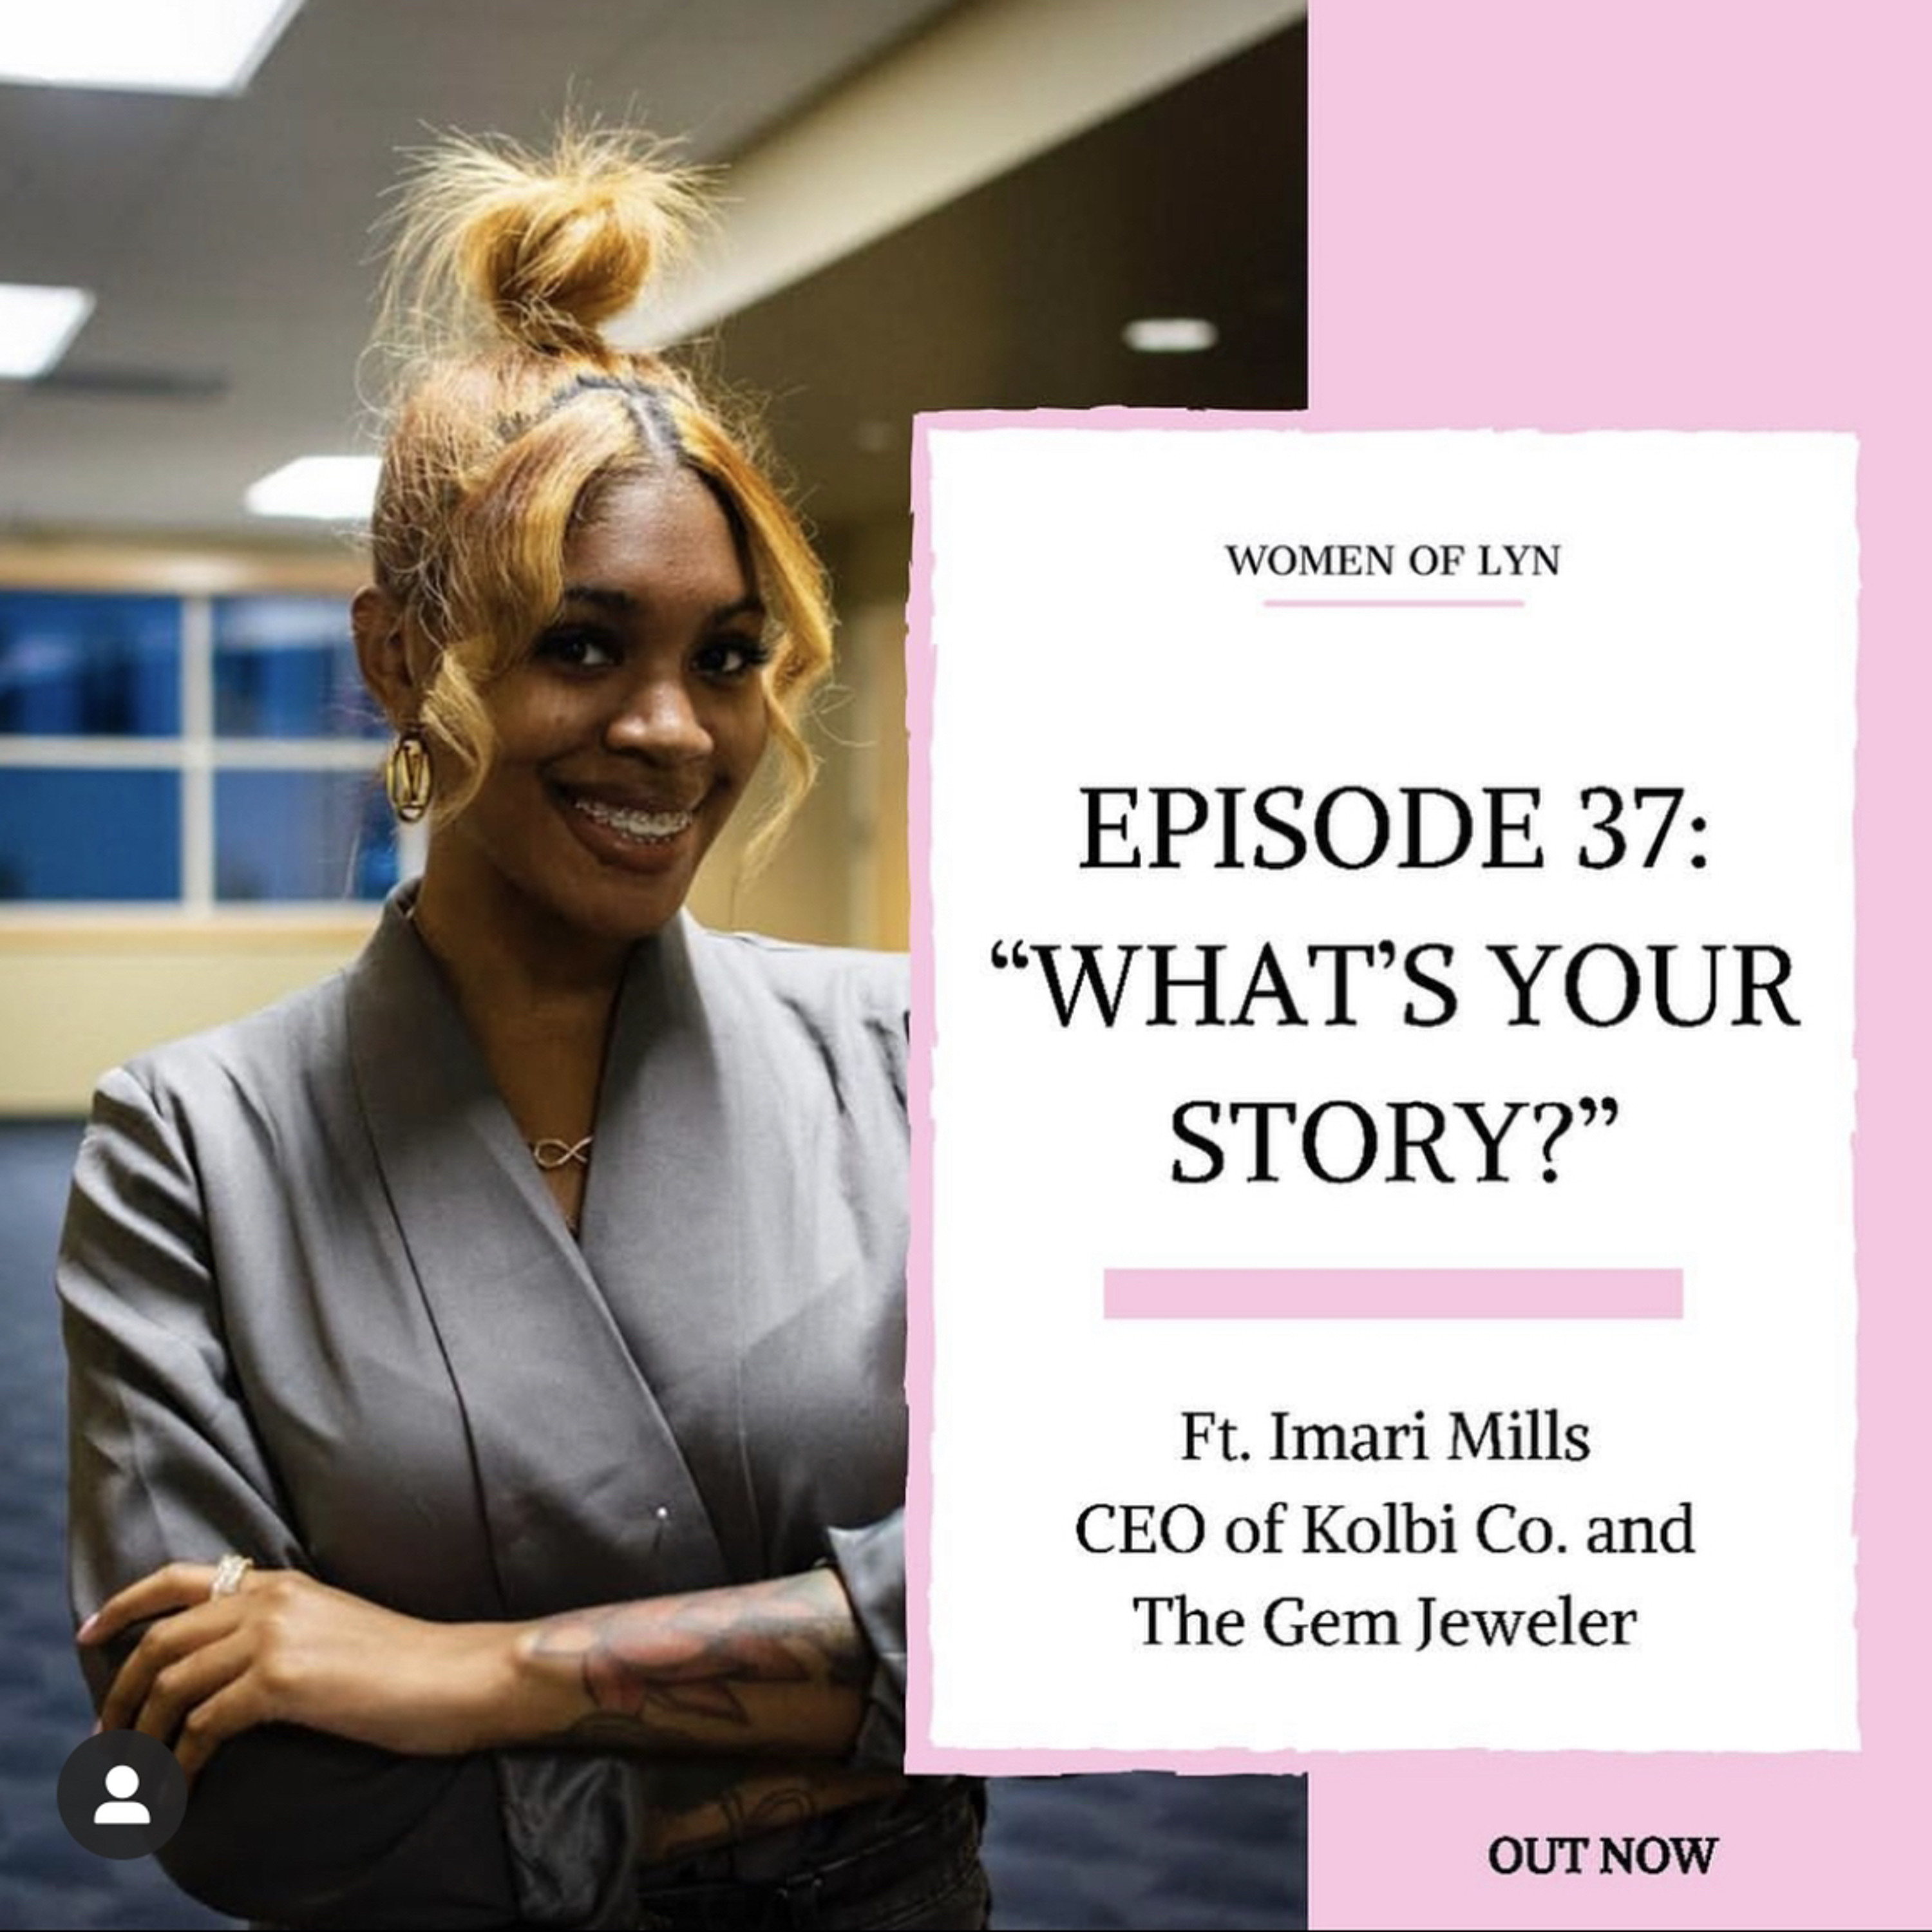 Episode 37: ”What’s Your Story?” Ft. Imari Mills